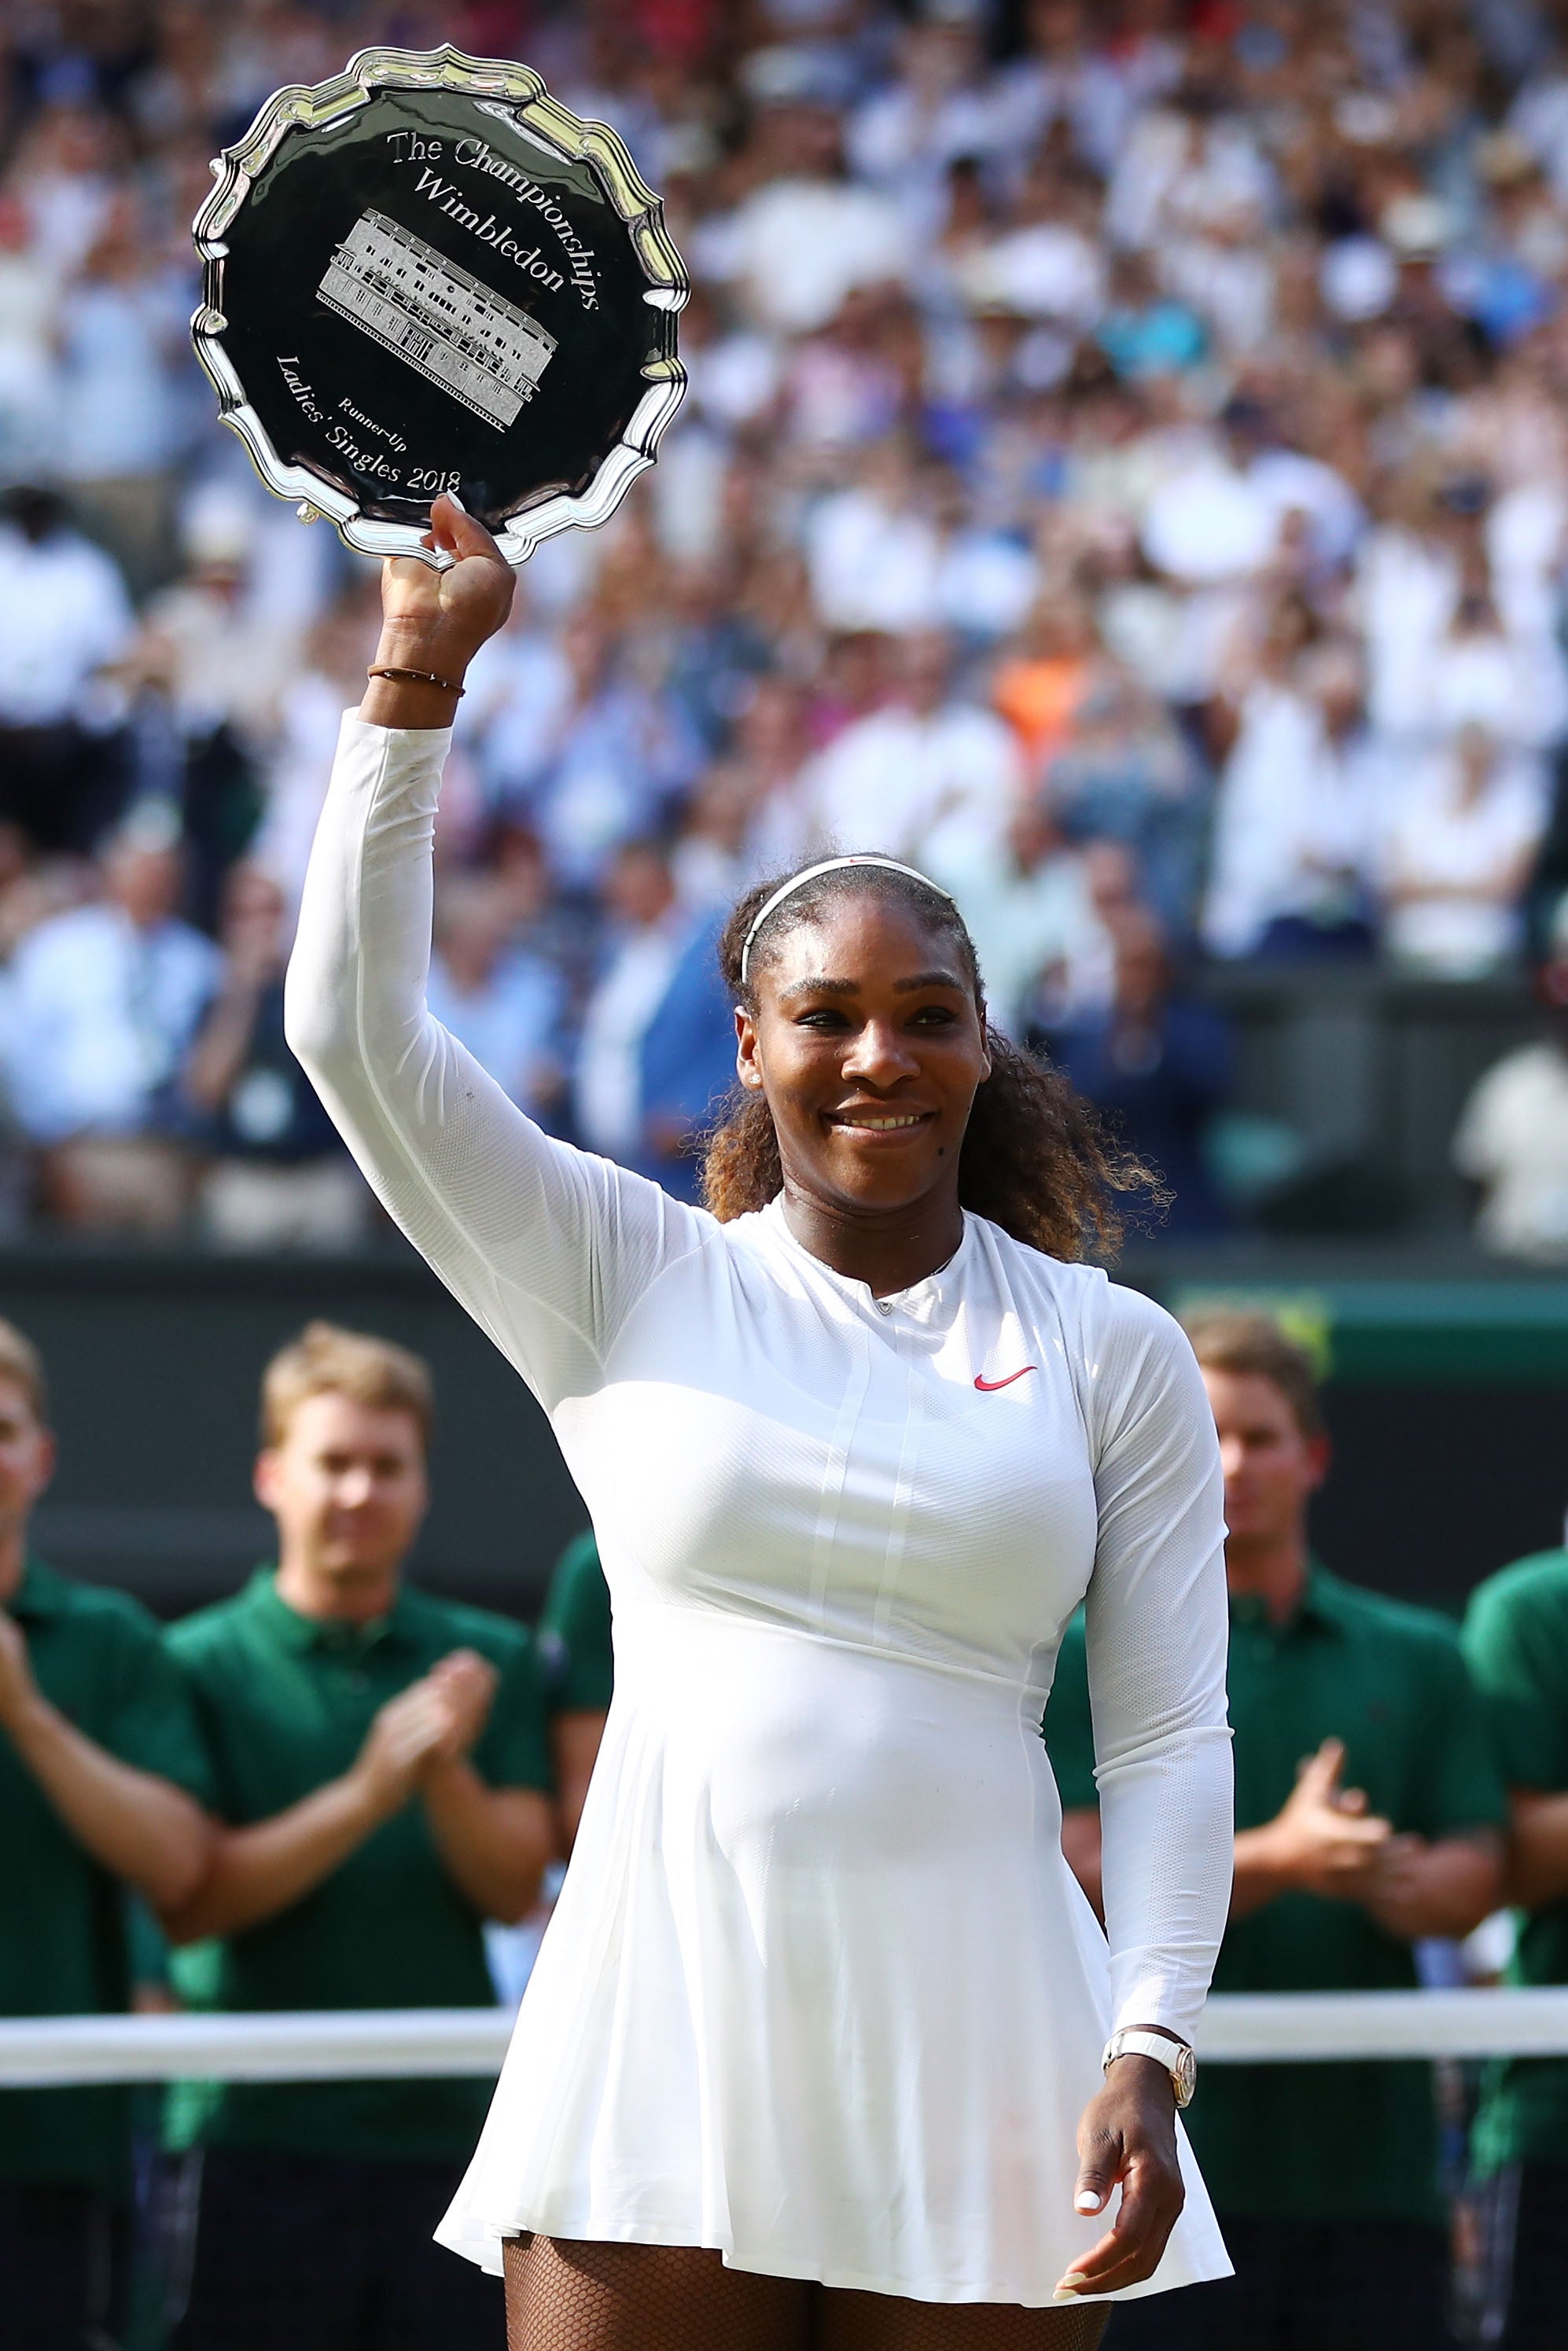 Serena Williams Believes She Is Being Unfairly Targeted With Excessive Drug Testing: 'I'm The One Getting Tested The Most'
